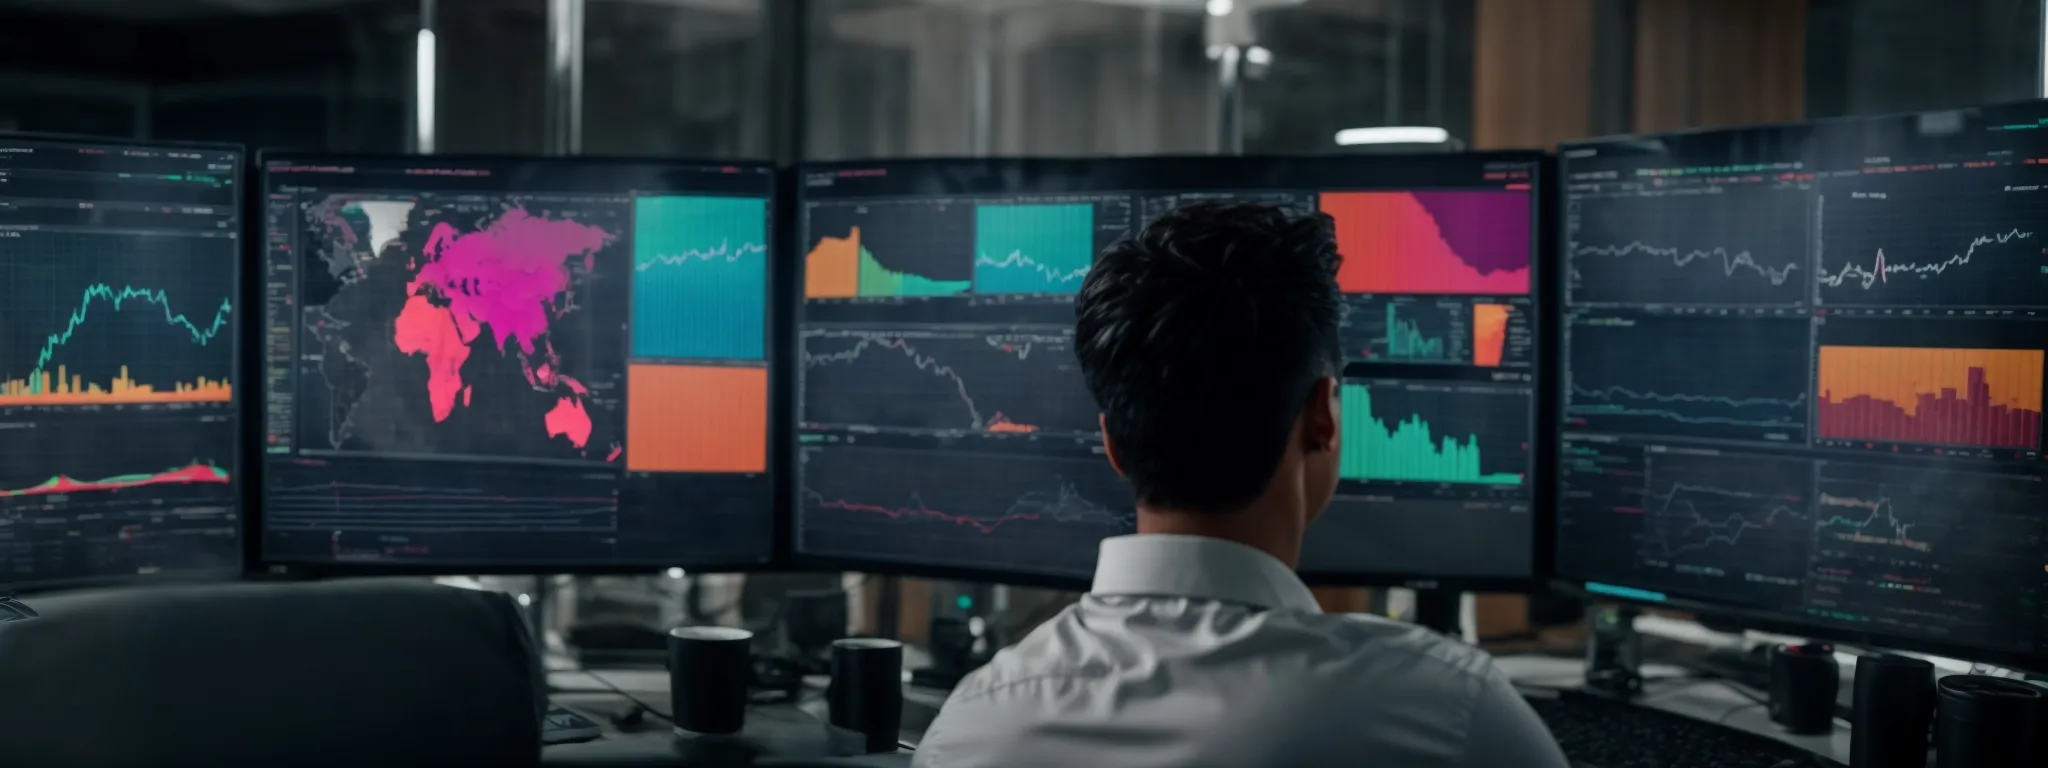 a person analyzing competitors on a large monitor displaying colorful graphs and analytics dashboards.